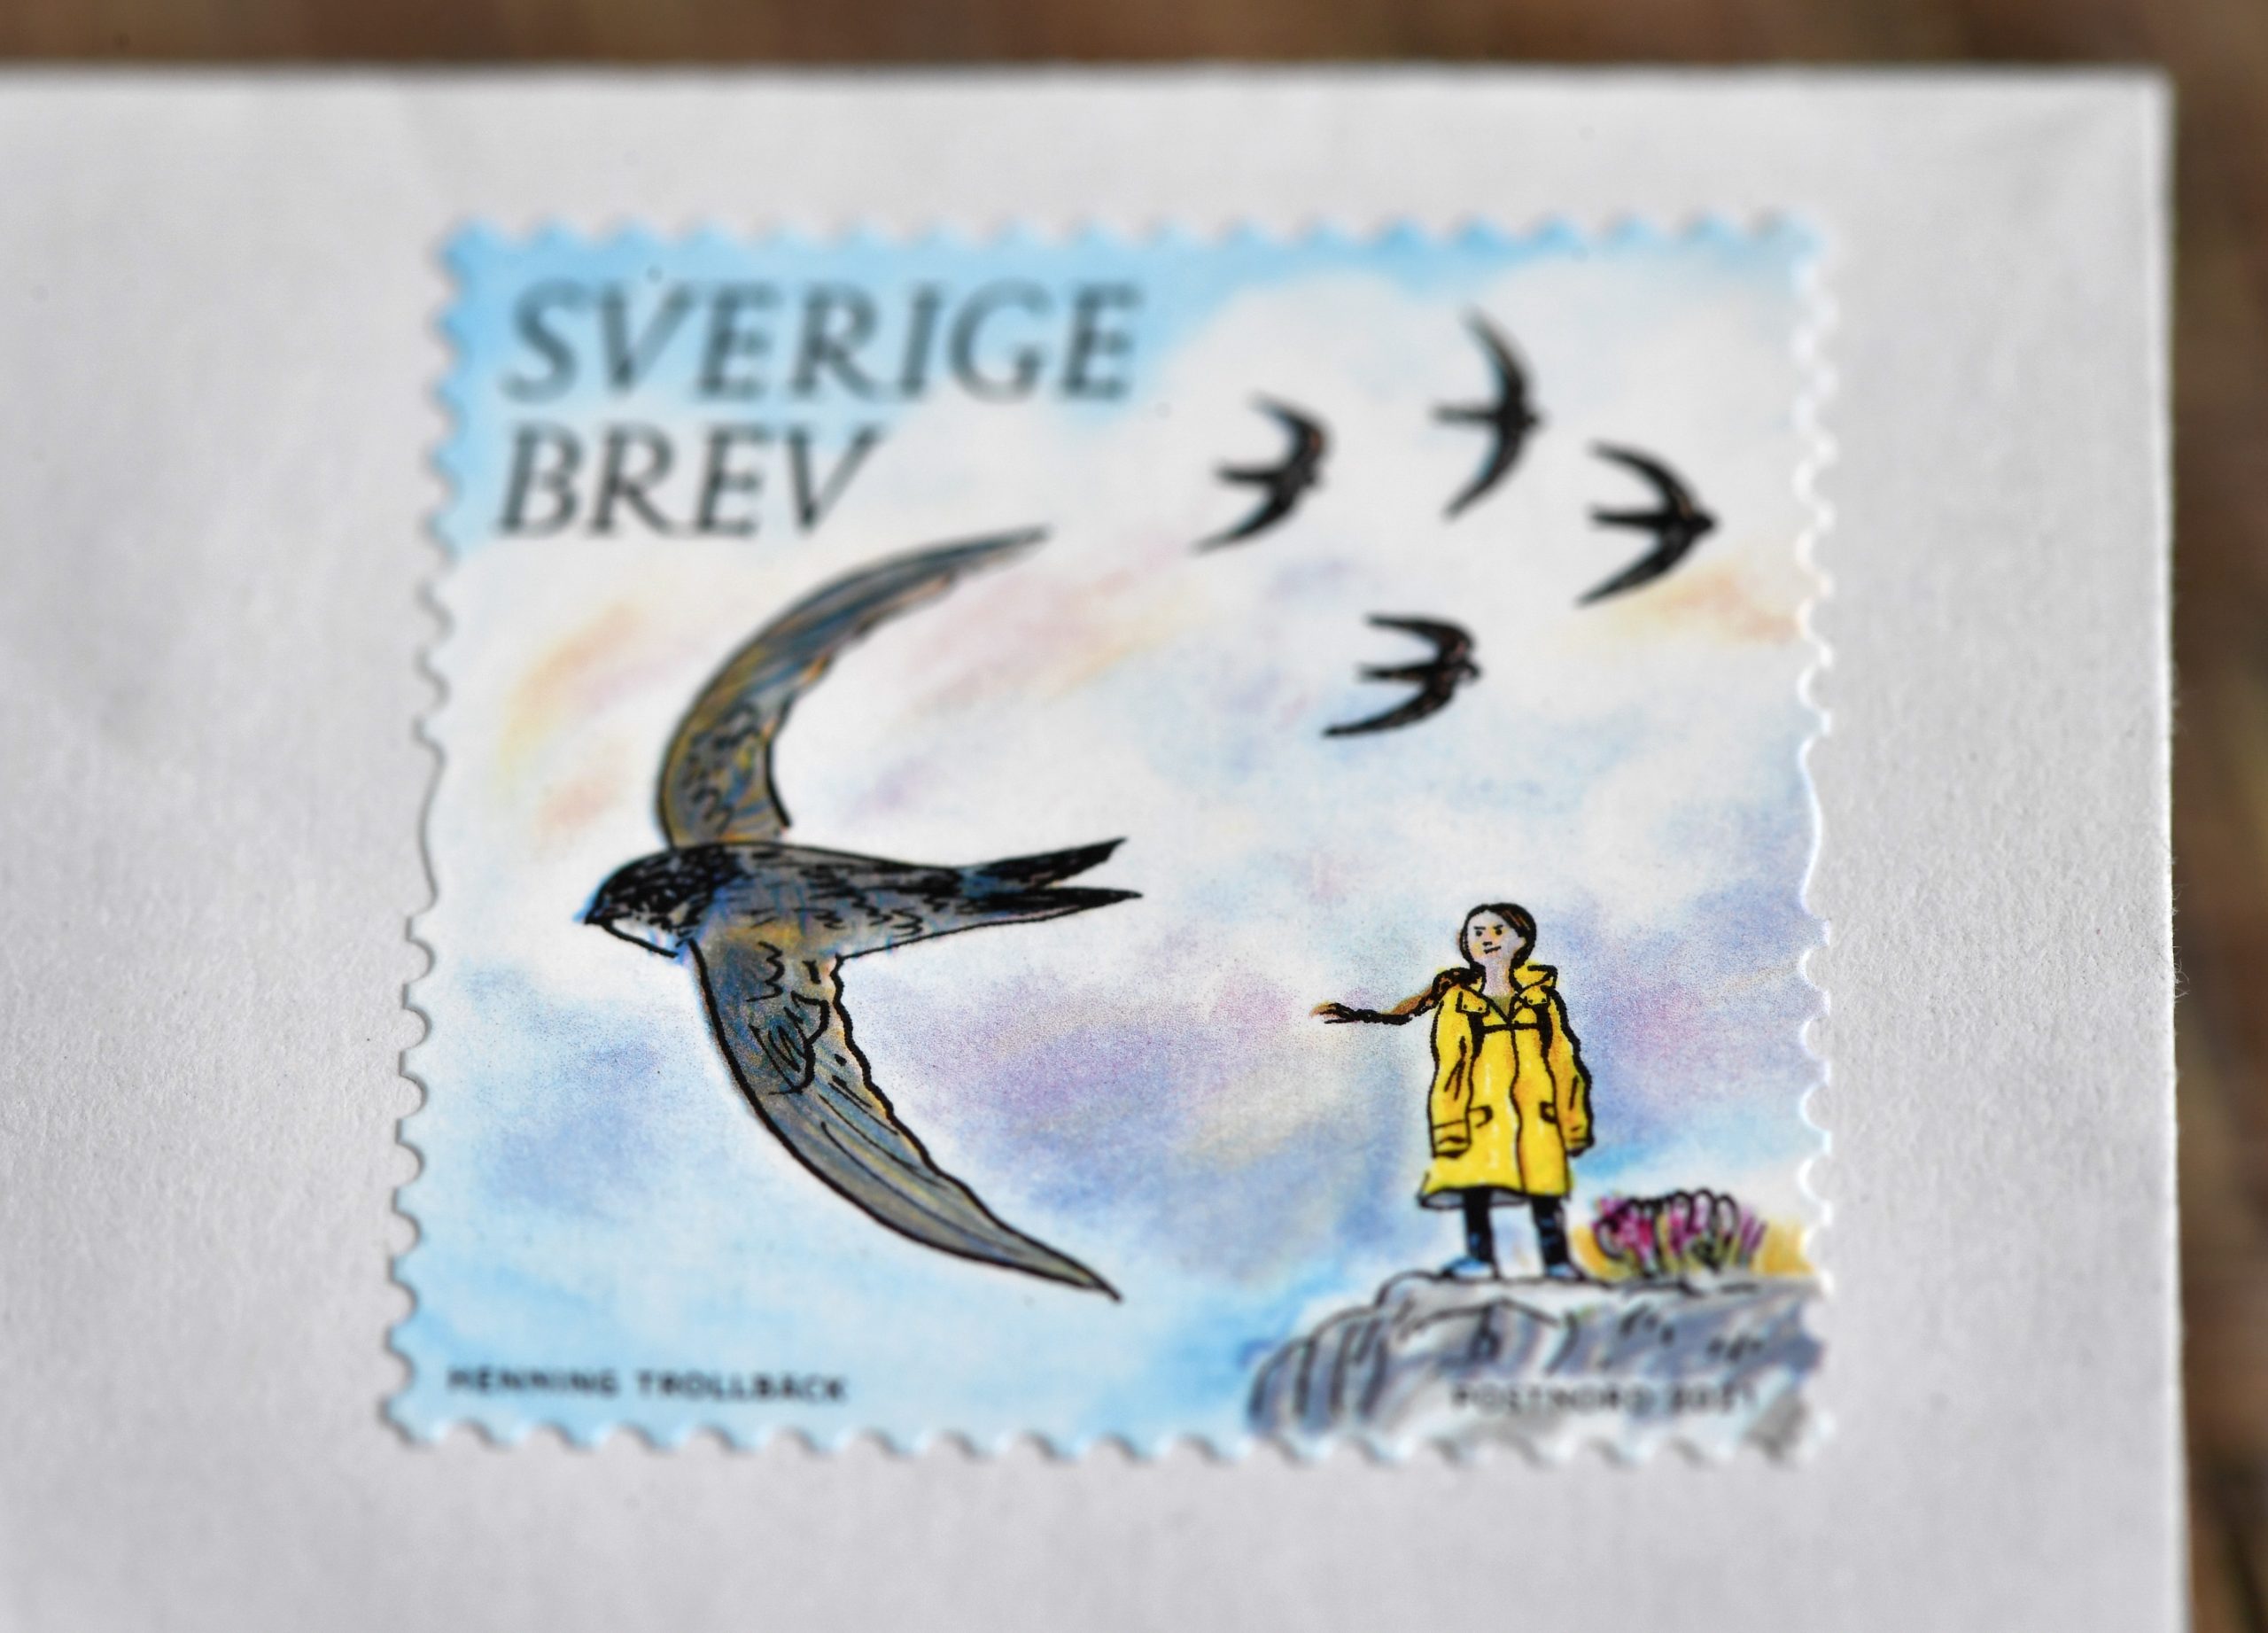 epa08936904 Swedish environmental activist Greta Thunberg appears on a postal stamp that is part of a series focusing on the environment, illustrated by Henning Trollback and released in Sweden, in Stockholm, Sweden, 14 January 2021.  EPA/ANDERS WIKLUND  SWEDEN OUT